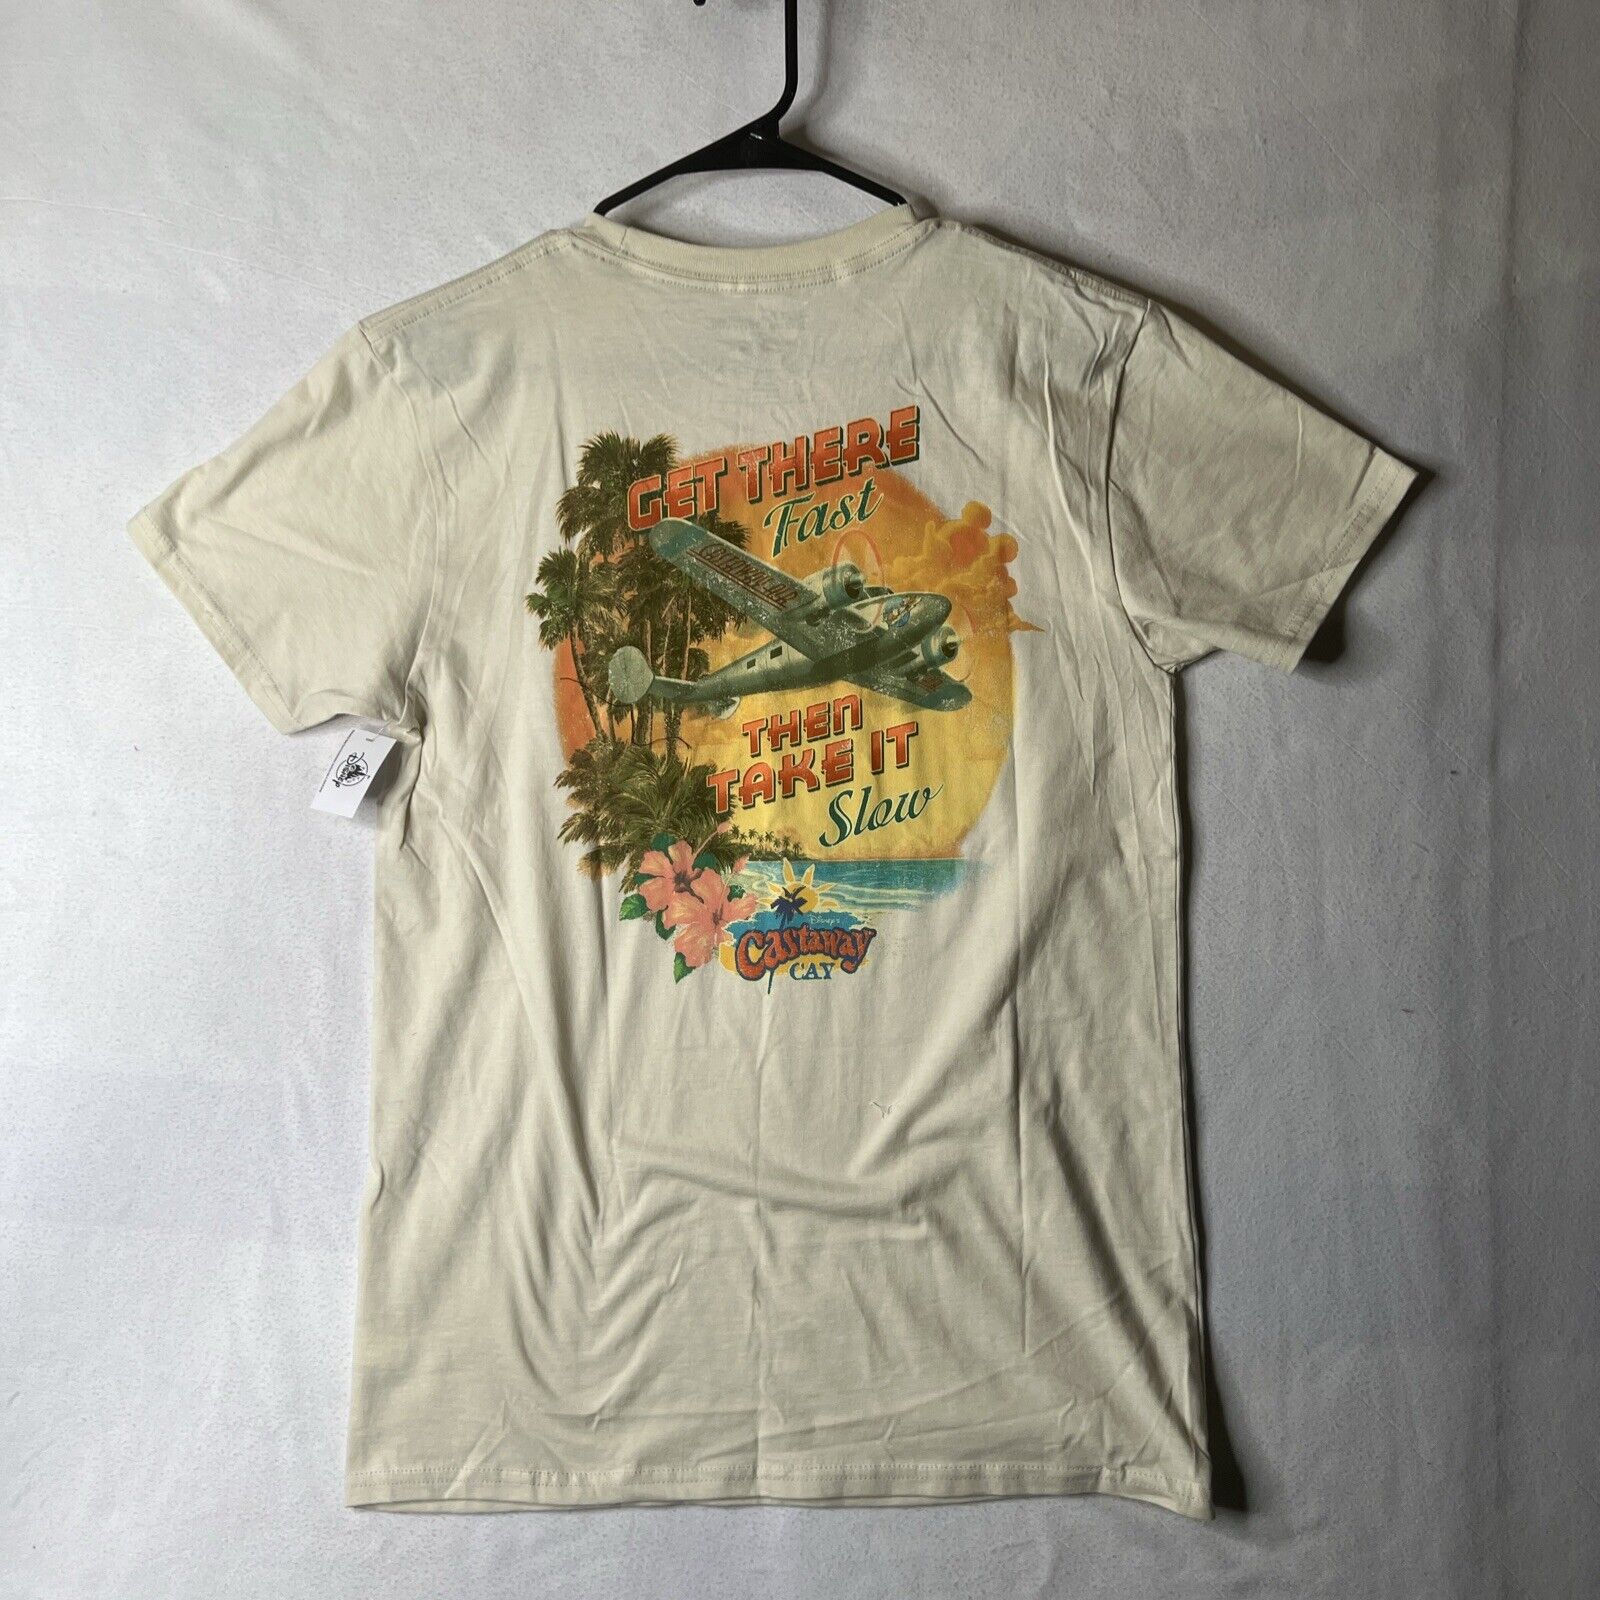 Disney Cruise Line Castaway Cay NWT DCL Shirt Med Take it slow